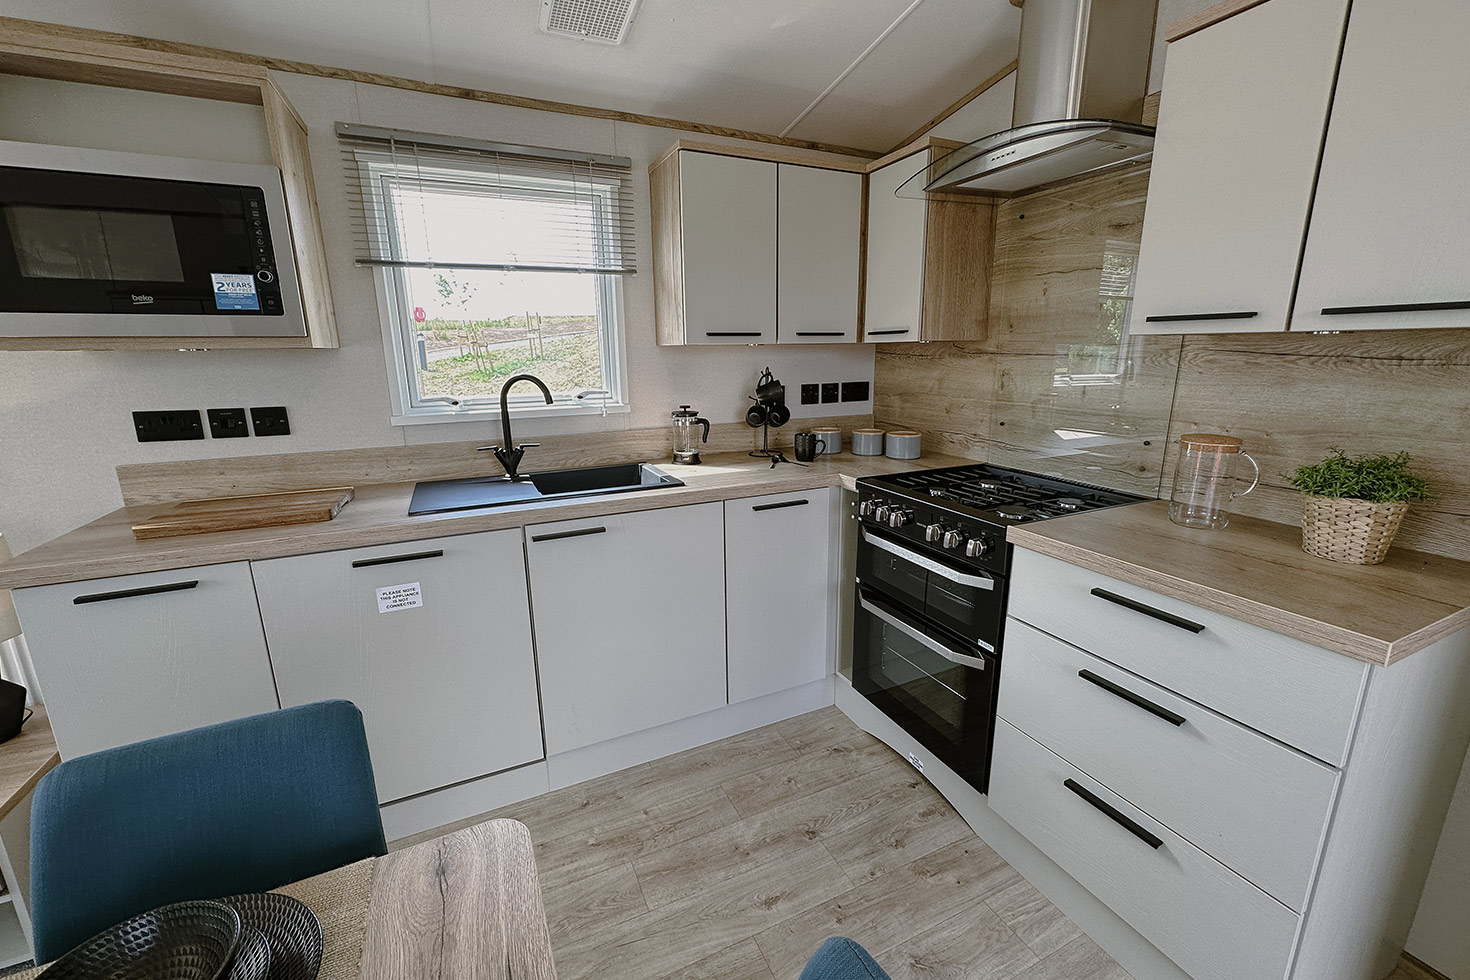 ABI Beverley 2023, brand new static caravan holiday lodge for sale Lake District